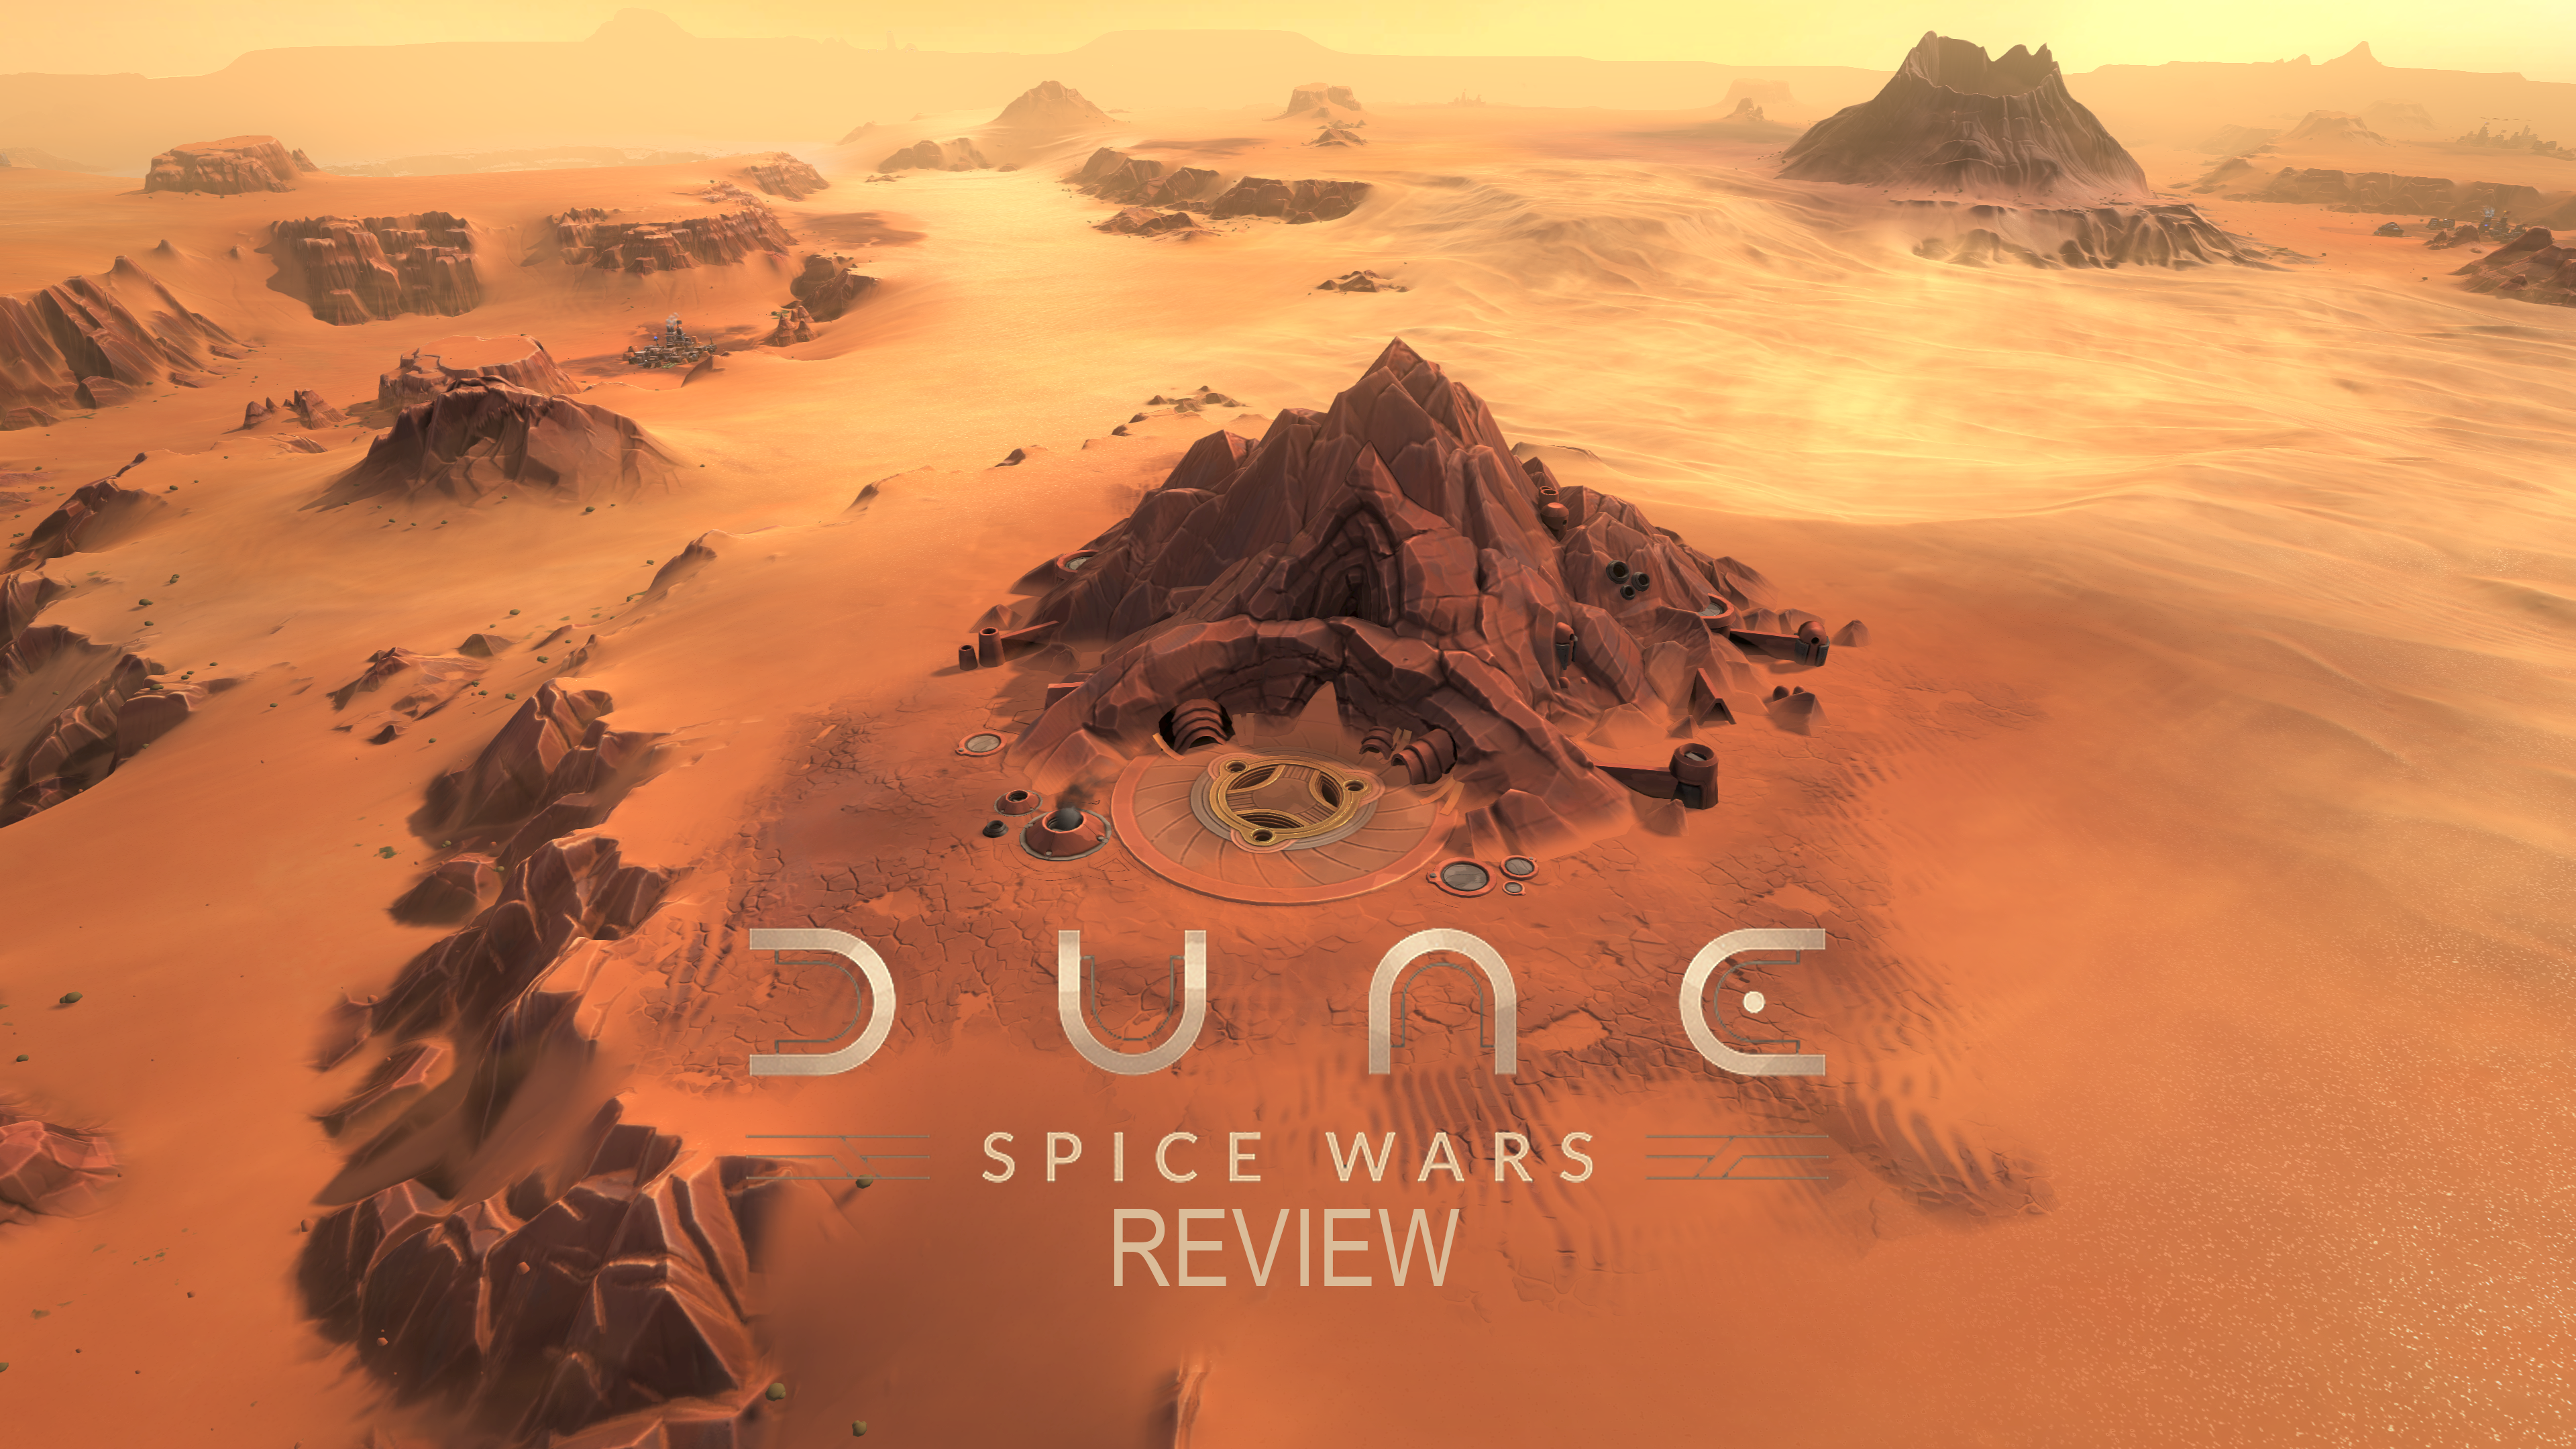 Compatible laptops for Dune Spice Wars: The best gaming laptop for Dune Spice Wars